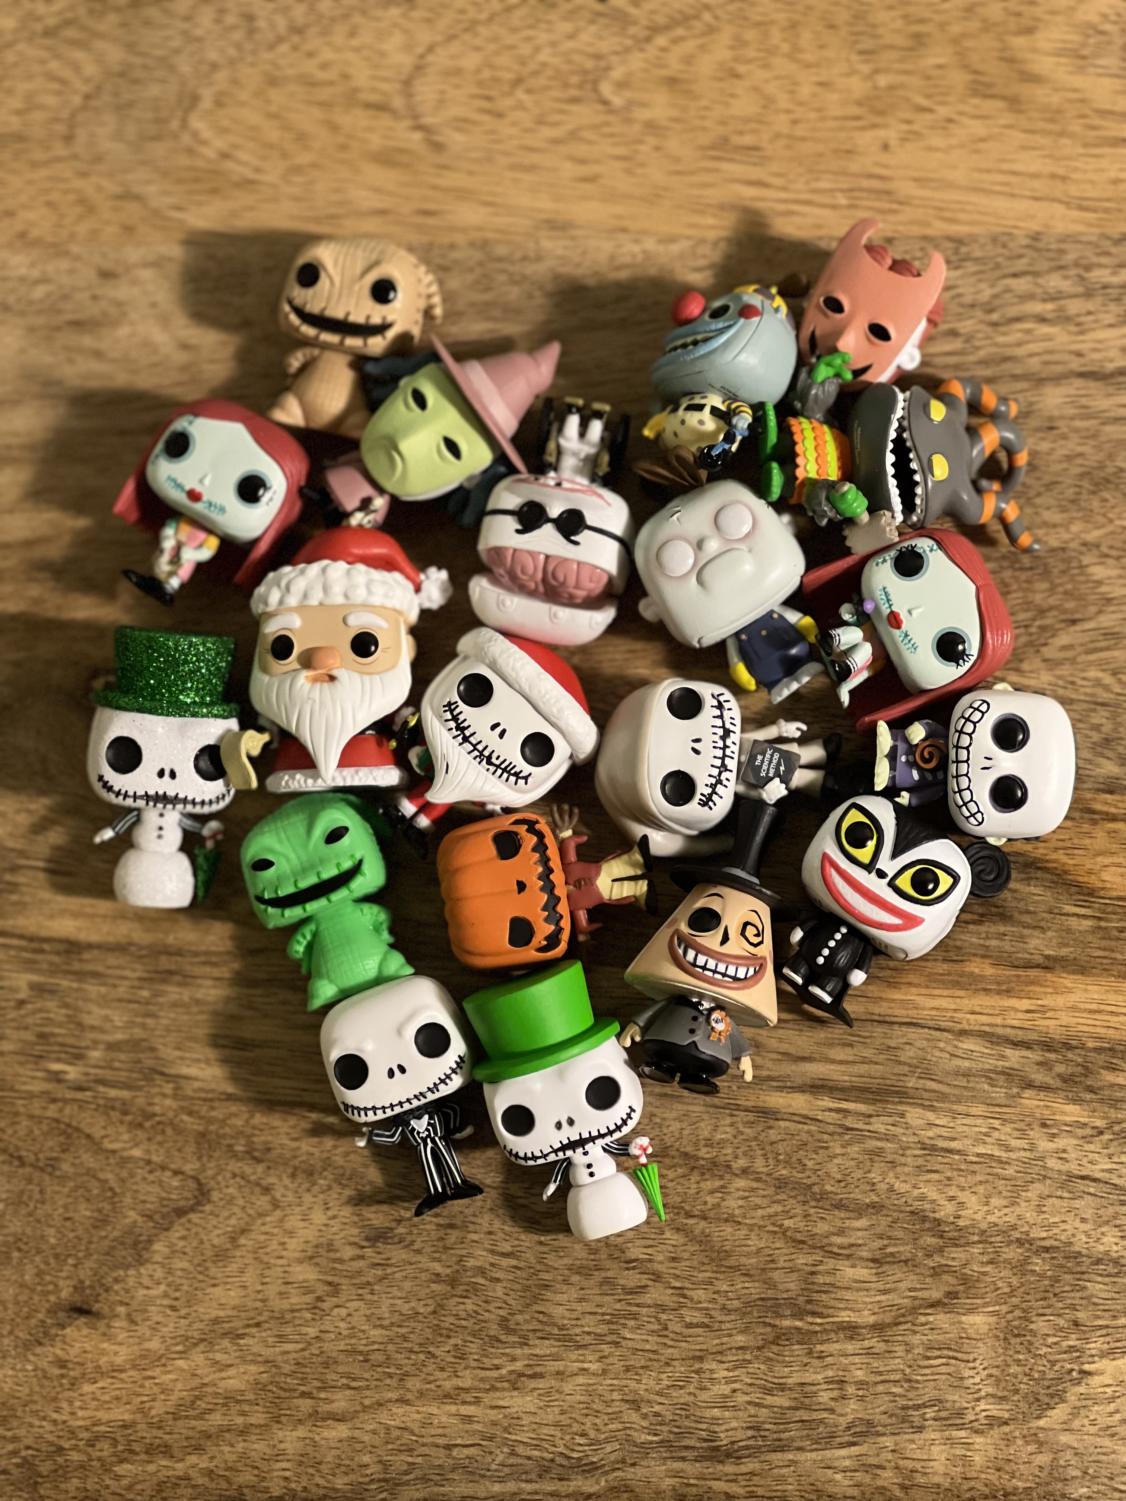 The Nightmare Before Christmas and Hocus Pocus Little People Sets